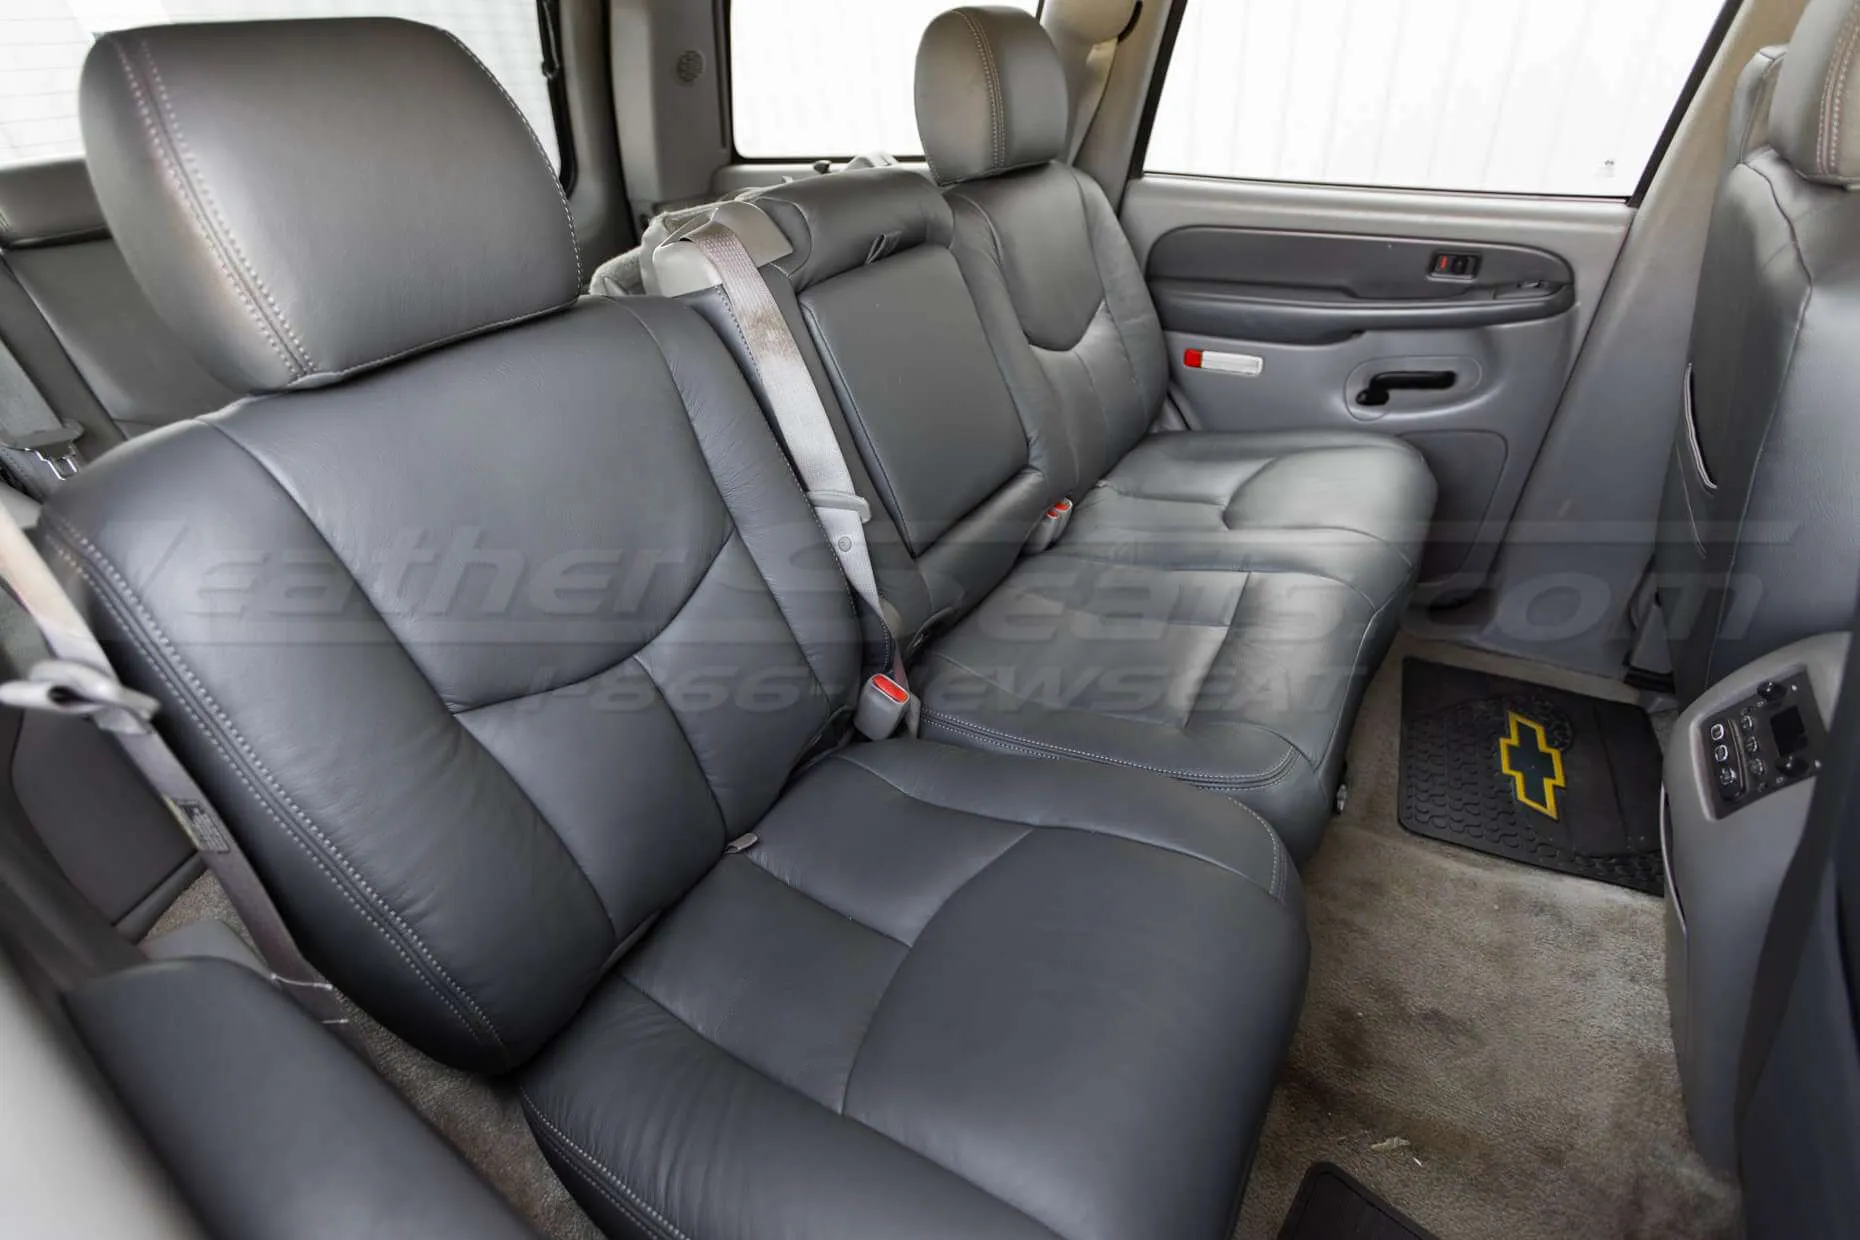 Chevy Tahoe 2 row with leahter seats - rear seats